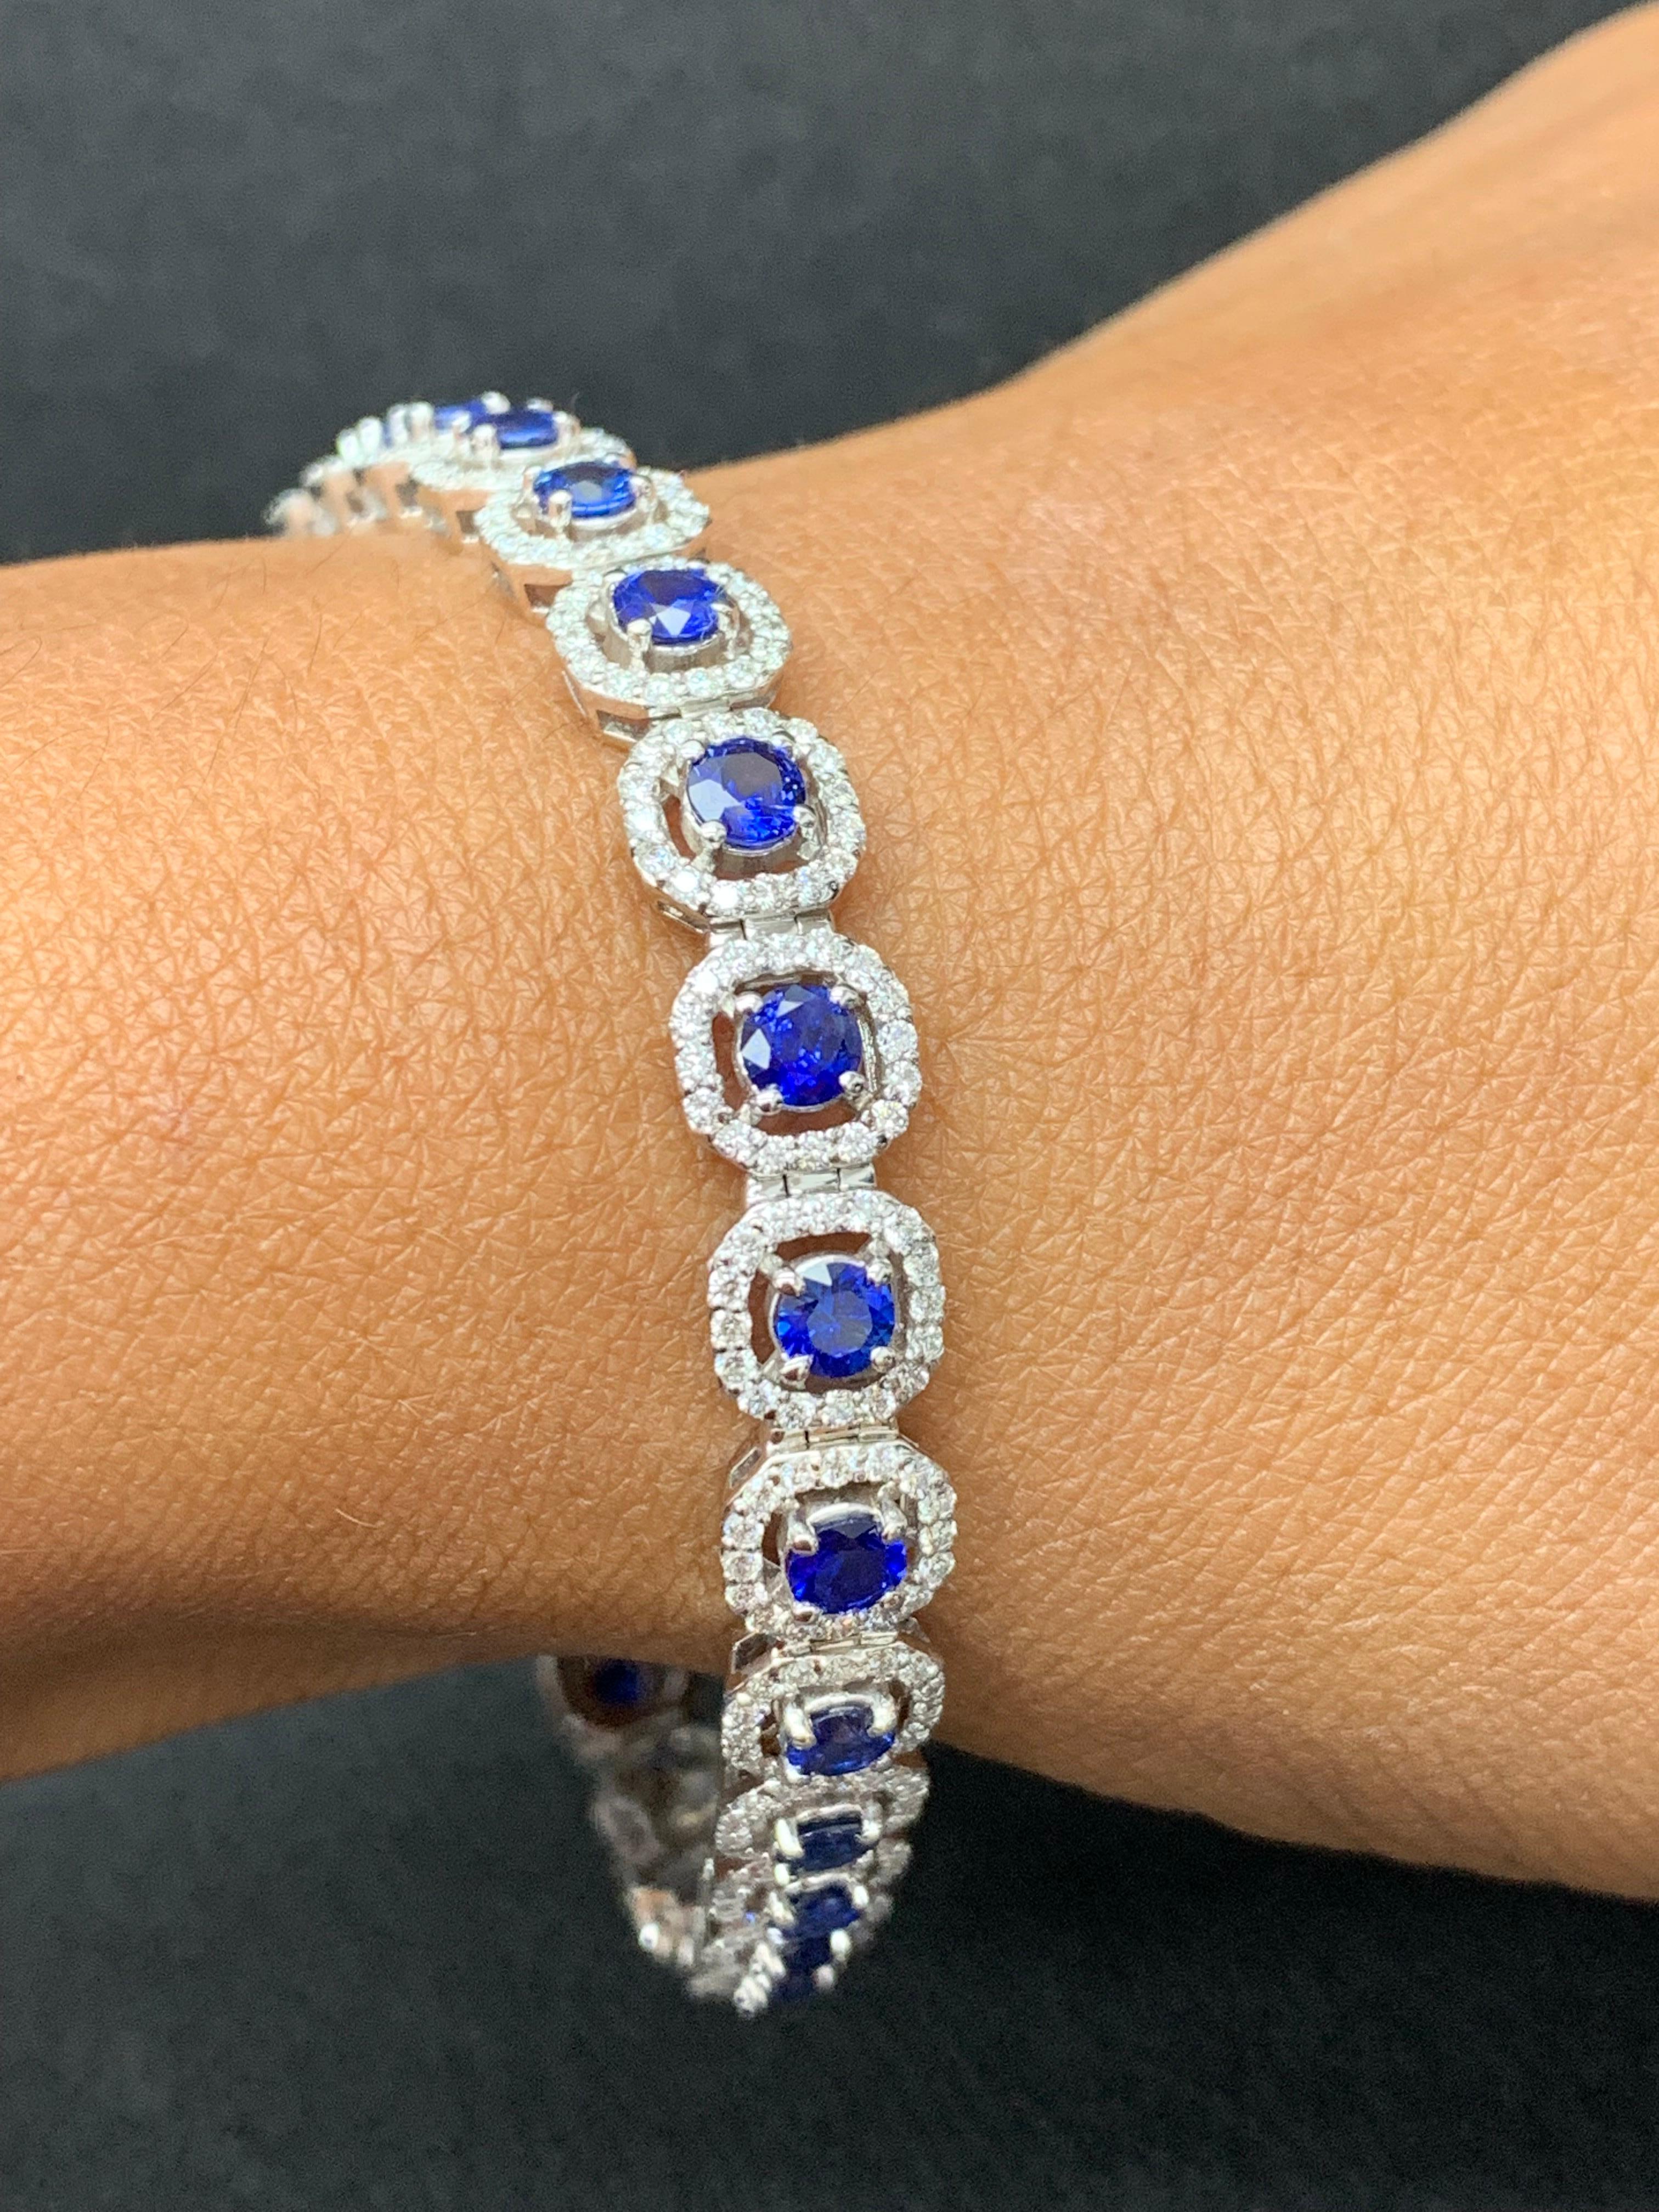 Contemporary 4.85 Carat Round BlueSapphire and Diamond Halo Tennis Bracelet in 14k White Gold For Sale